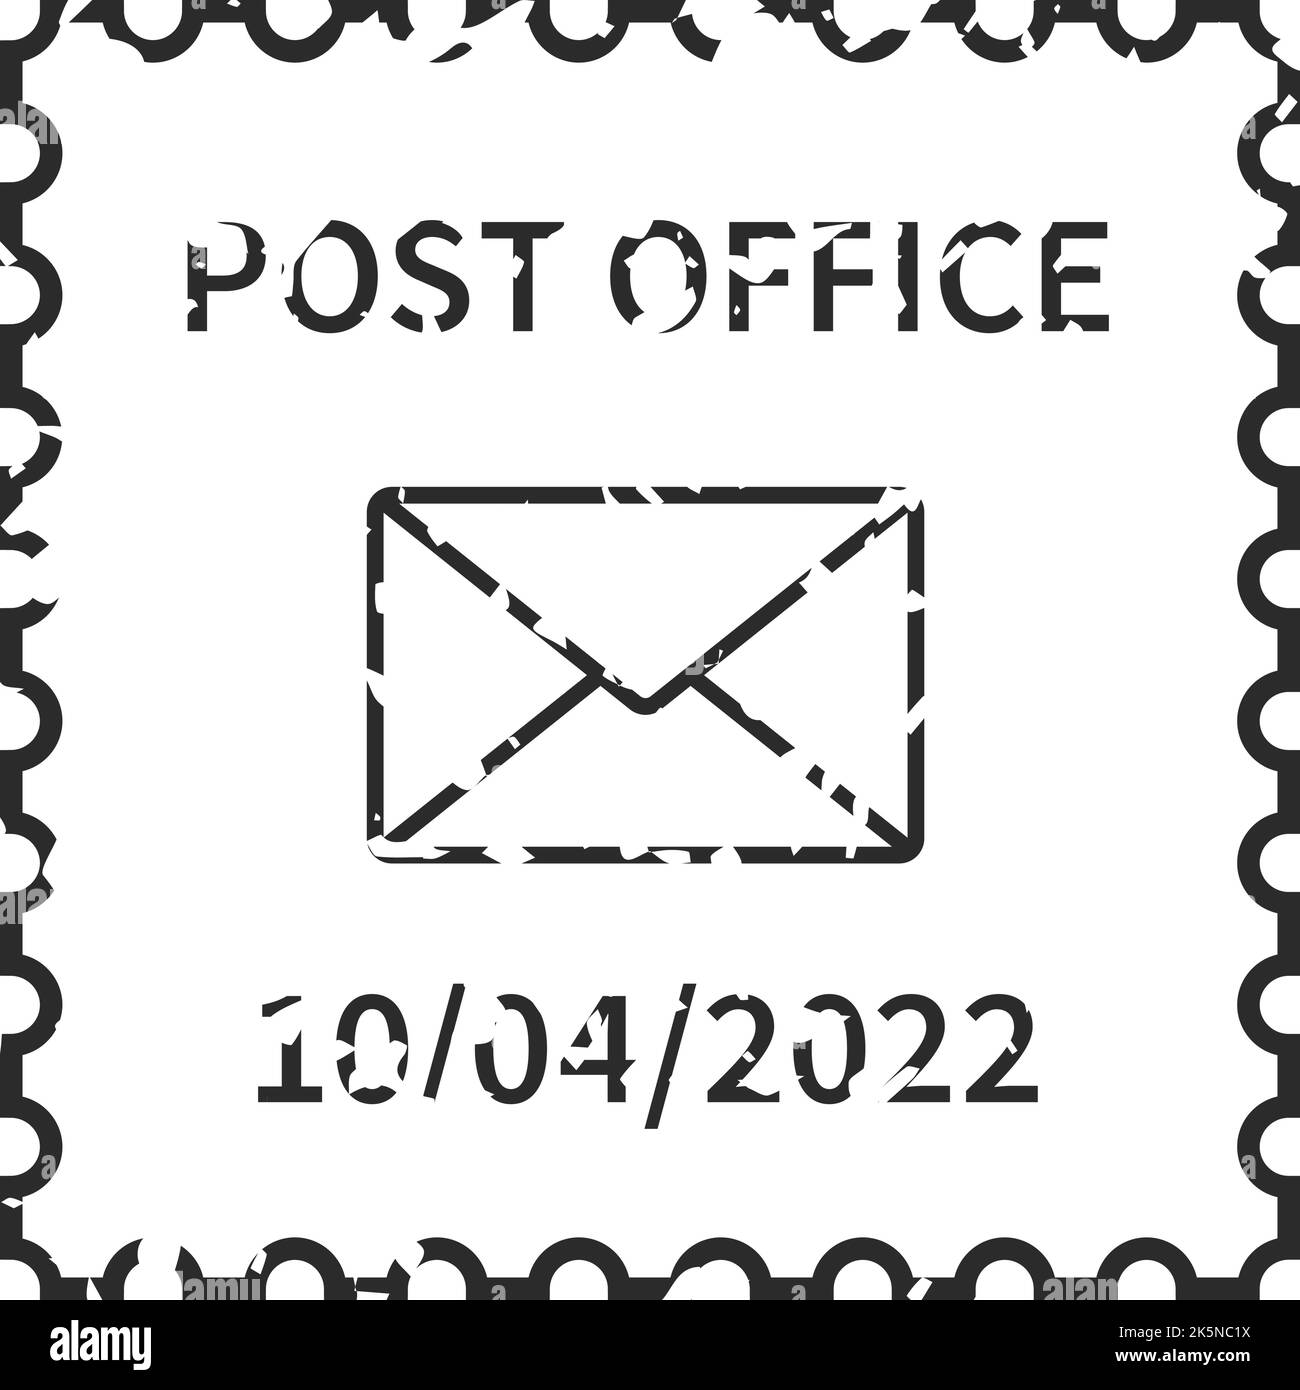 Vector illustration of the Approved stamp and editable dates (day, month  and year) in ink stamps Stock Vector Image & Art - Alamy